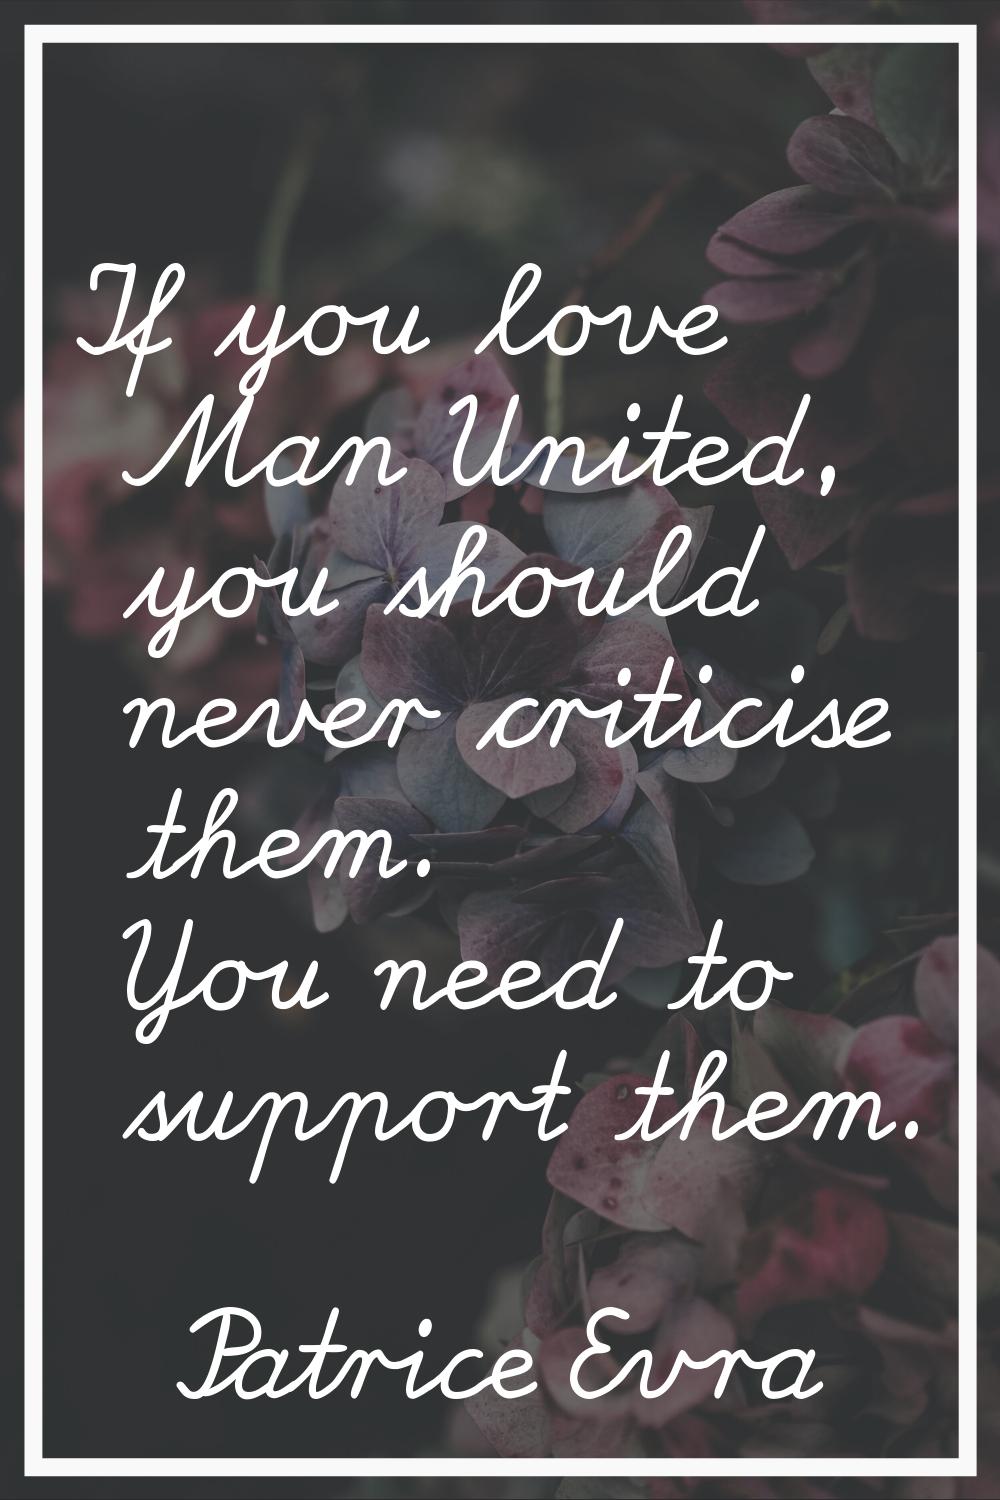 If you love Man United, you should never criticise them. You need to support them.